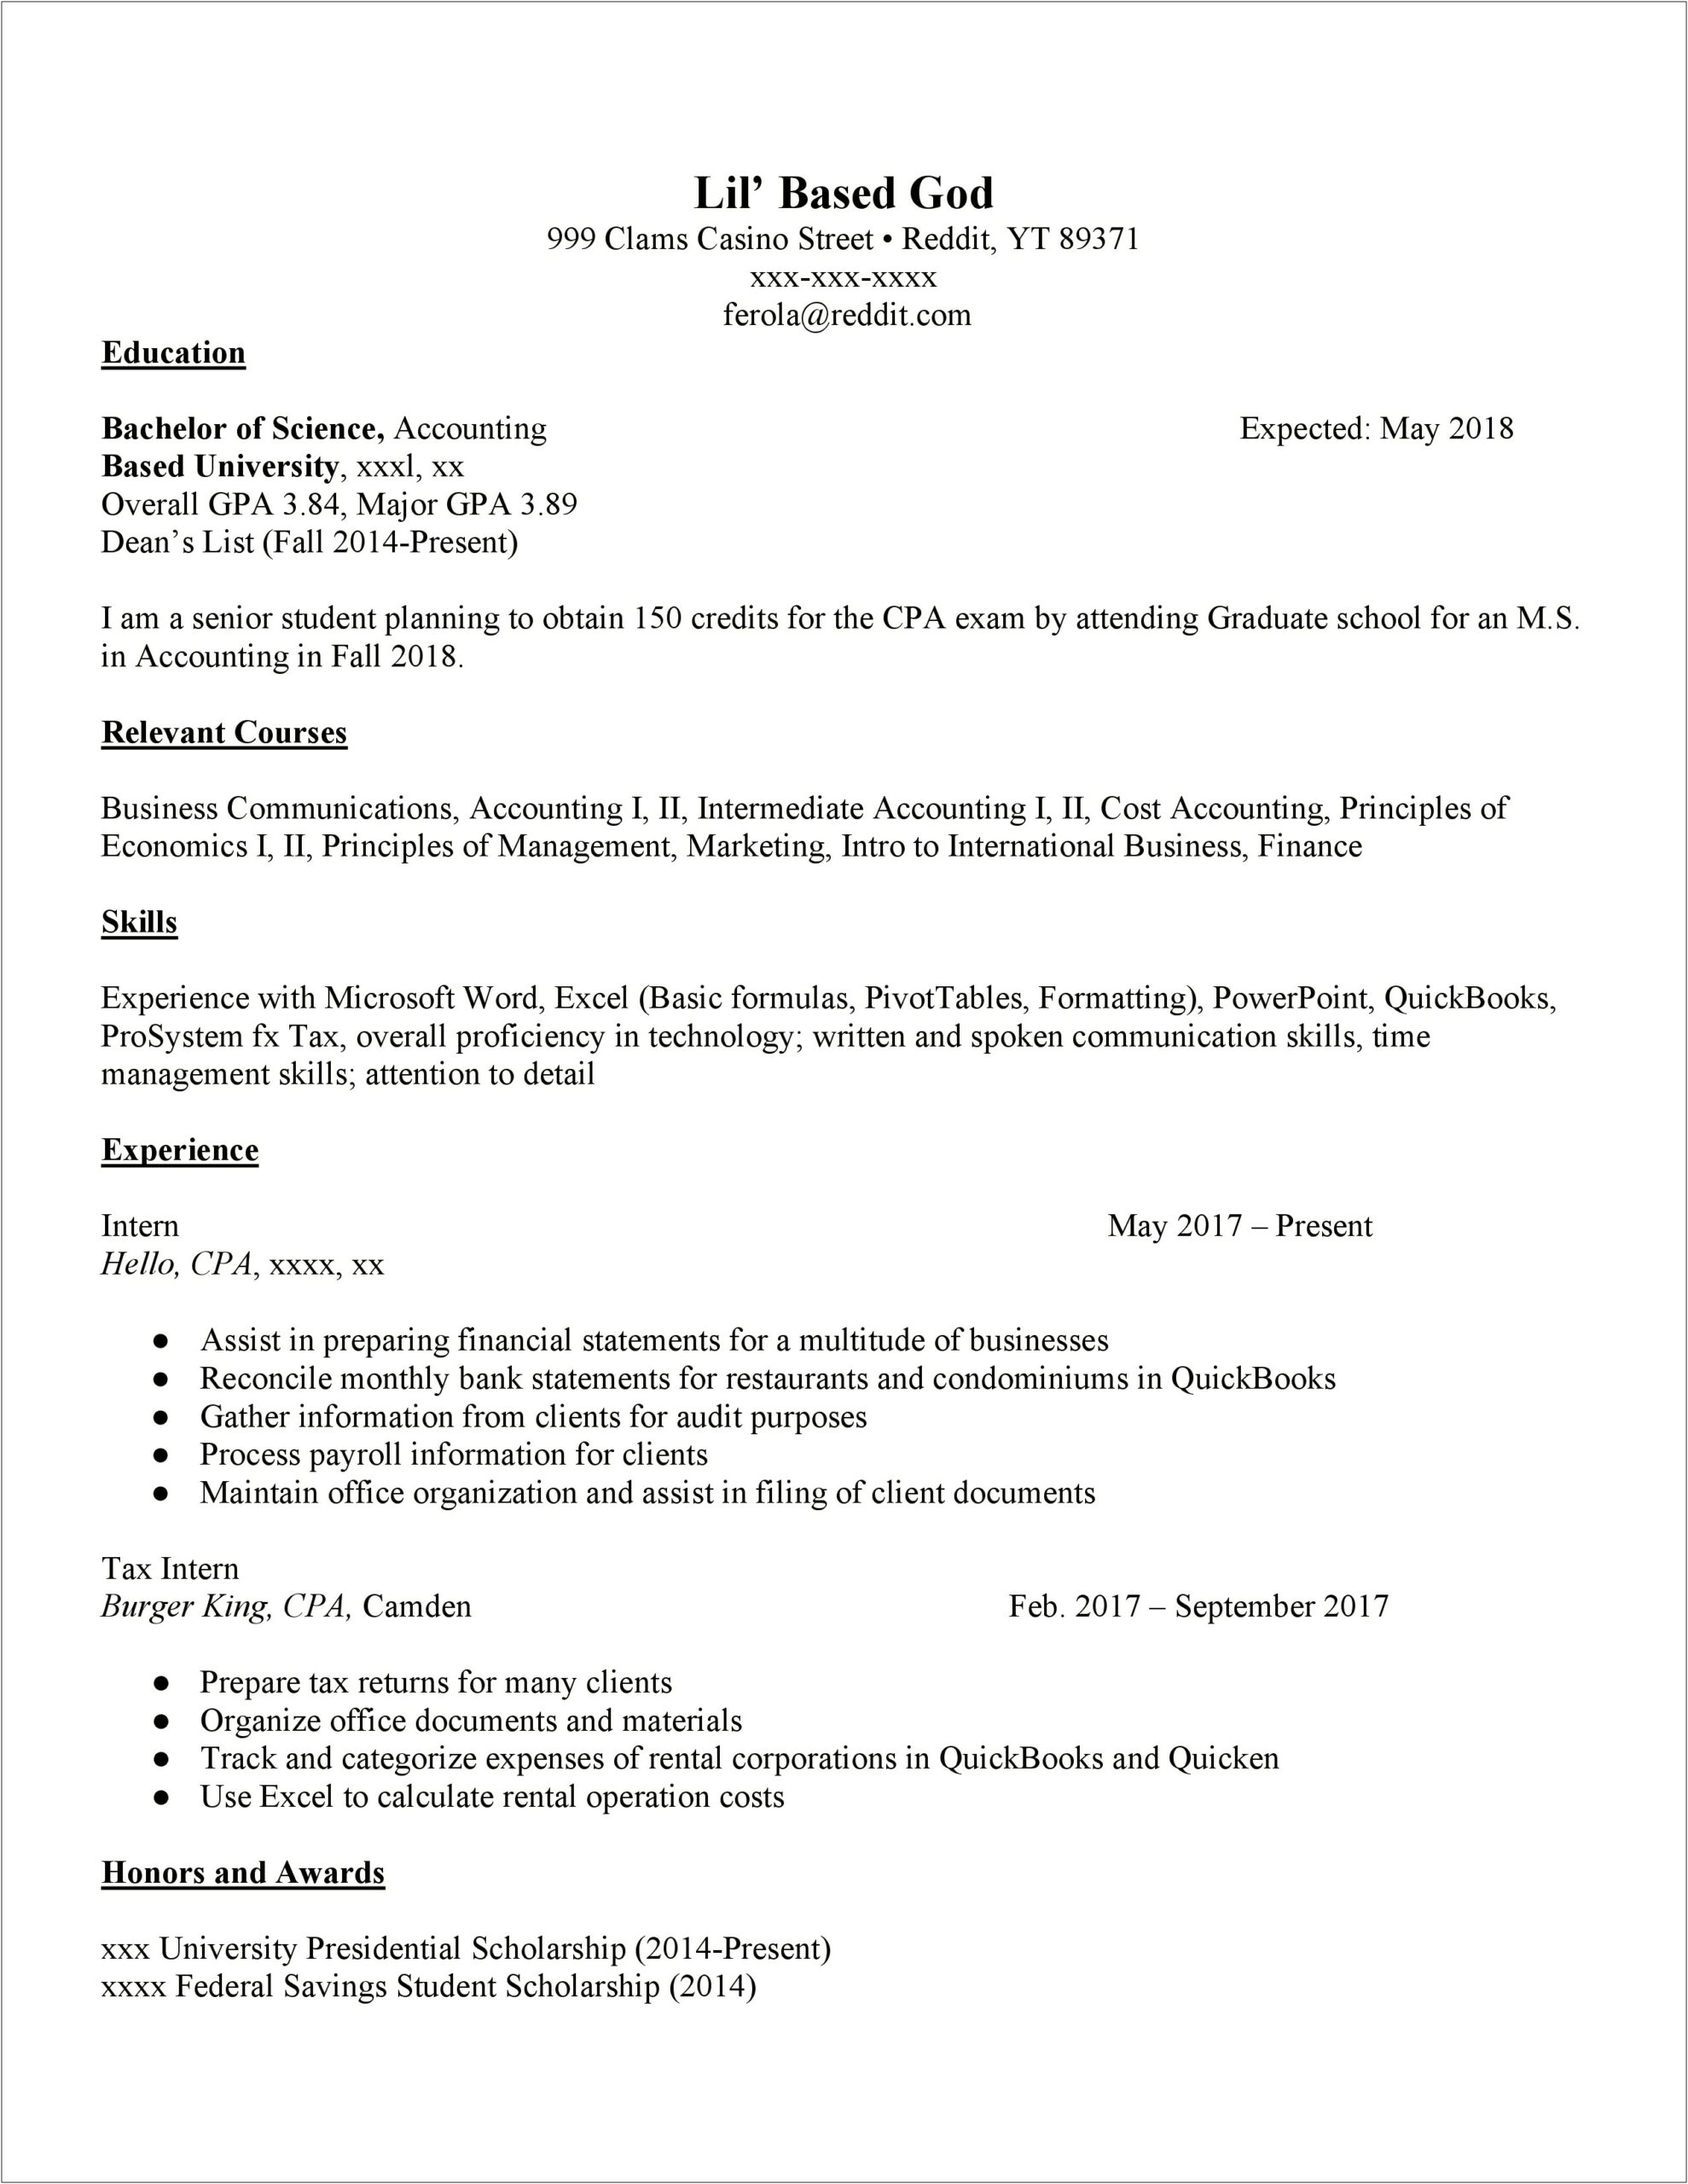 Skills Section Of Resume Accounting Reddit